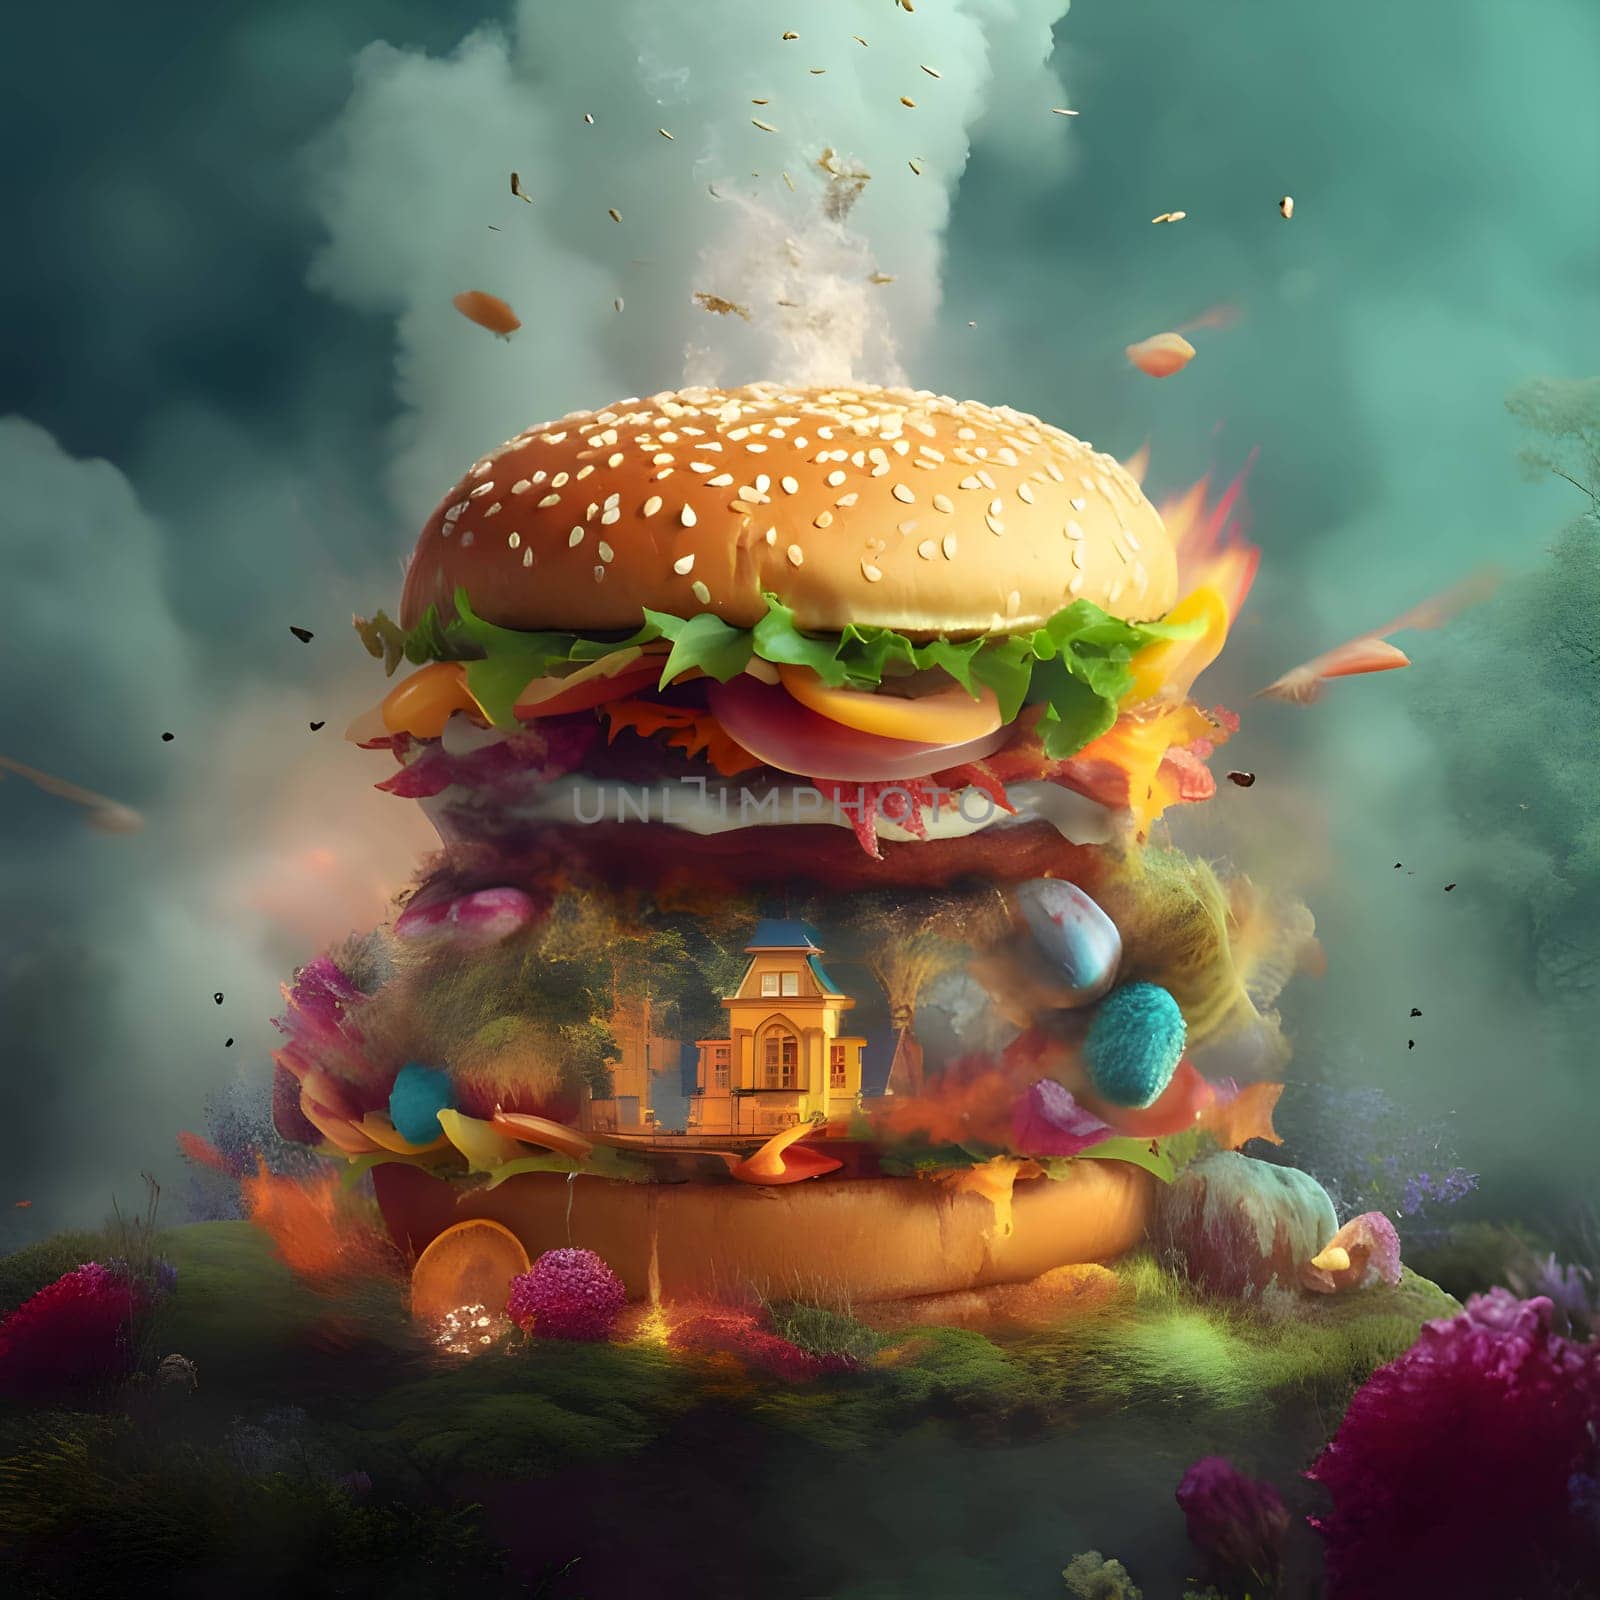 An abstract illustration showcasing the fusion of a hamburger and elements of nature, creating a captivating arrangement that celebrates culinary delights and the natural world.